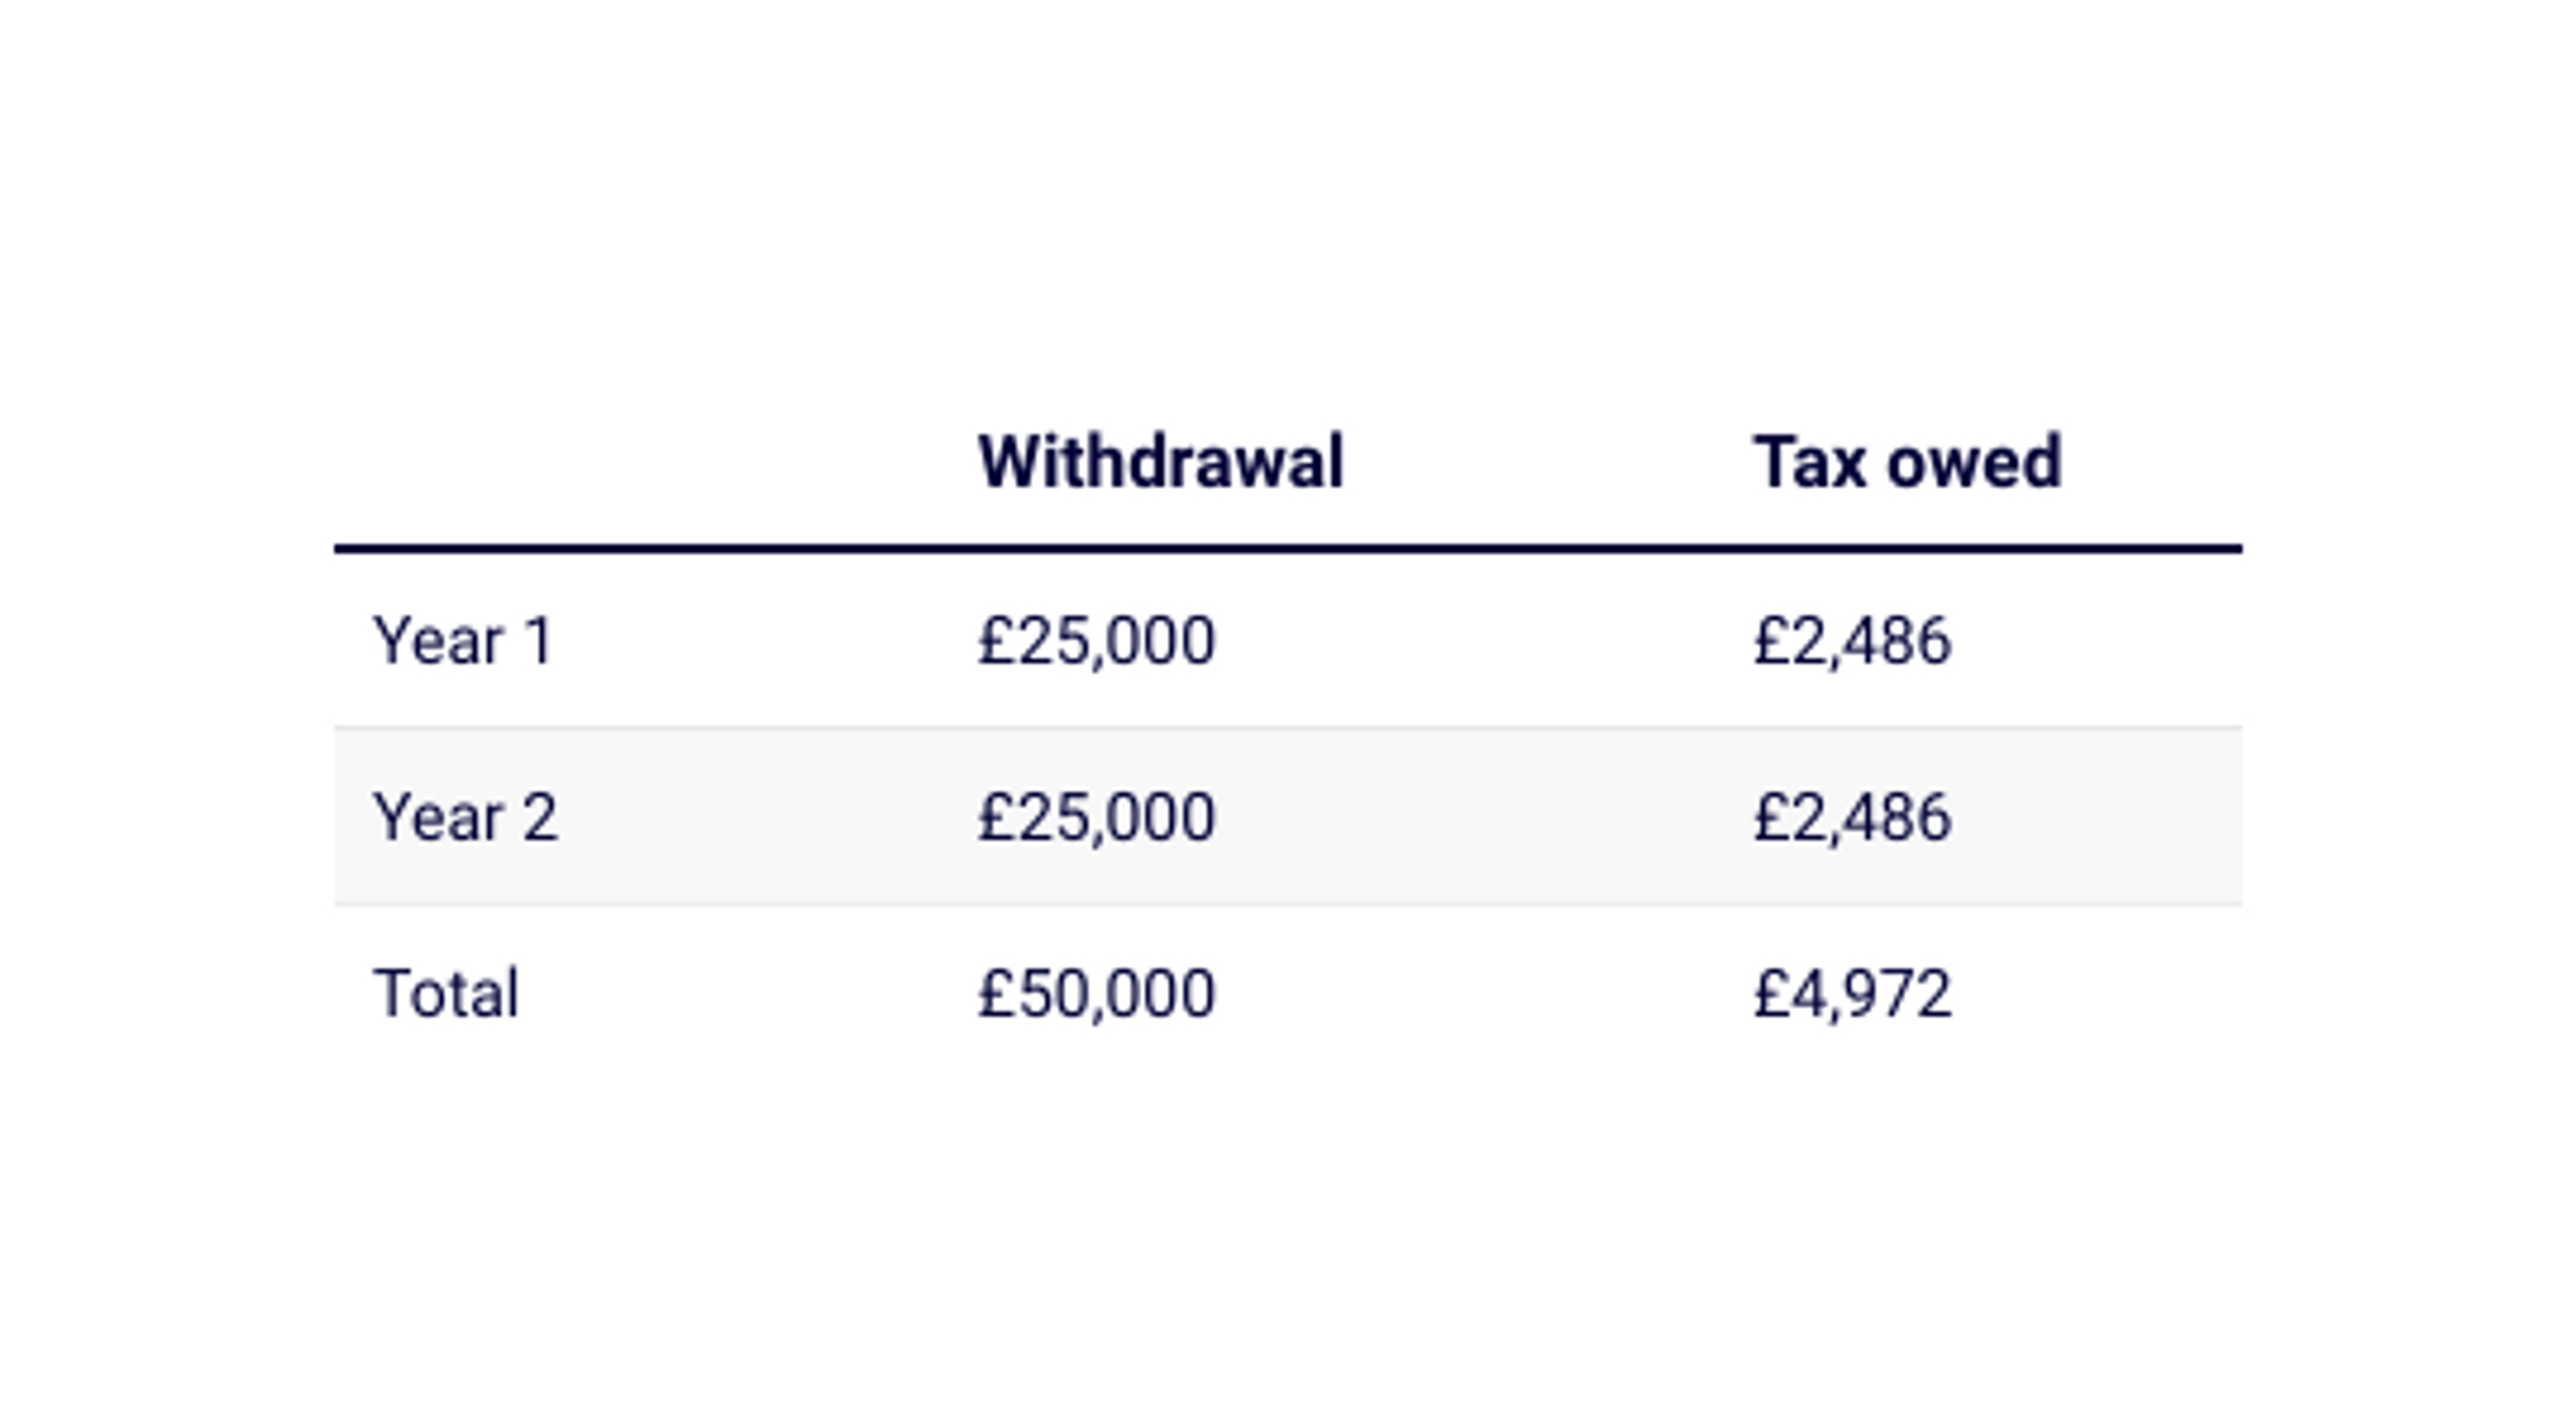 Table showing pension withdrawal tax owed when more efficient